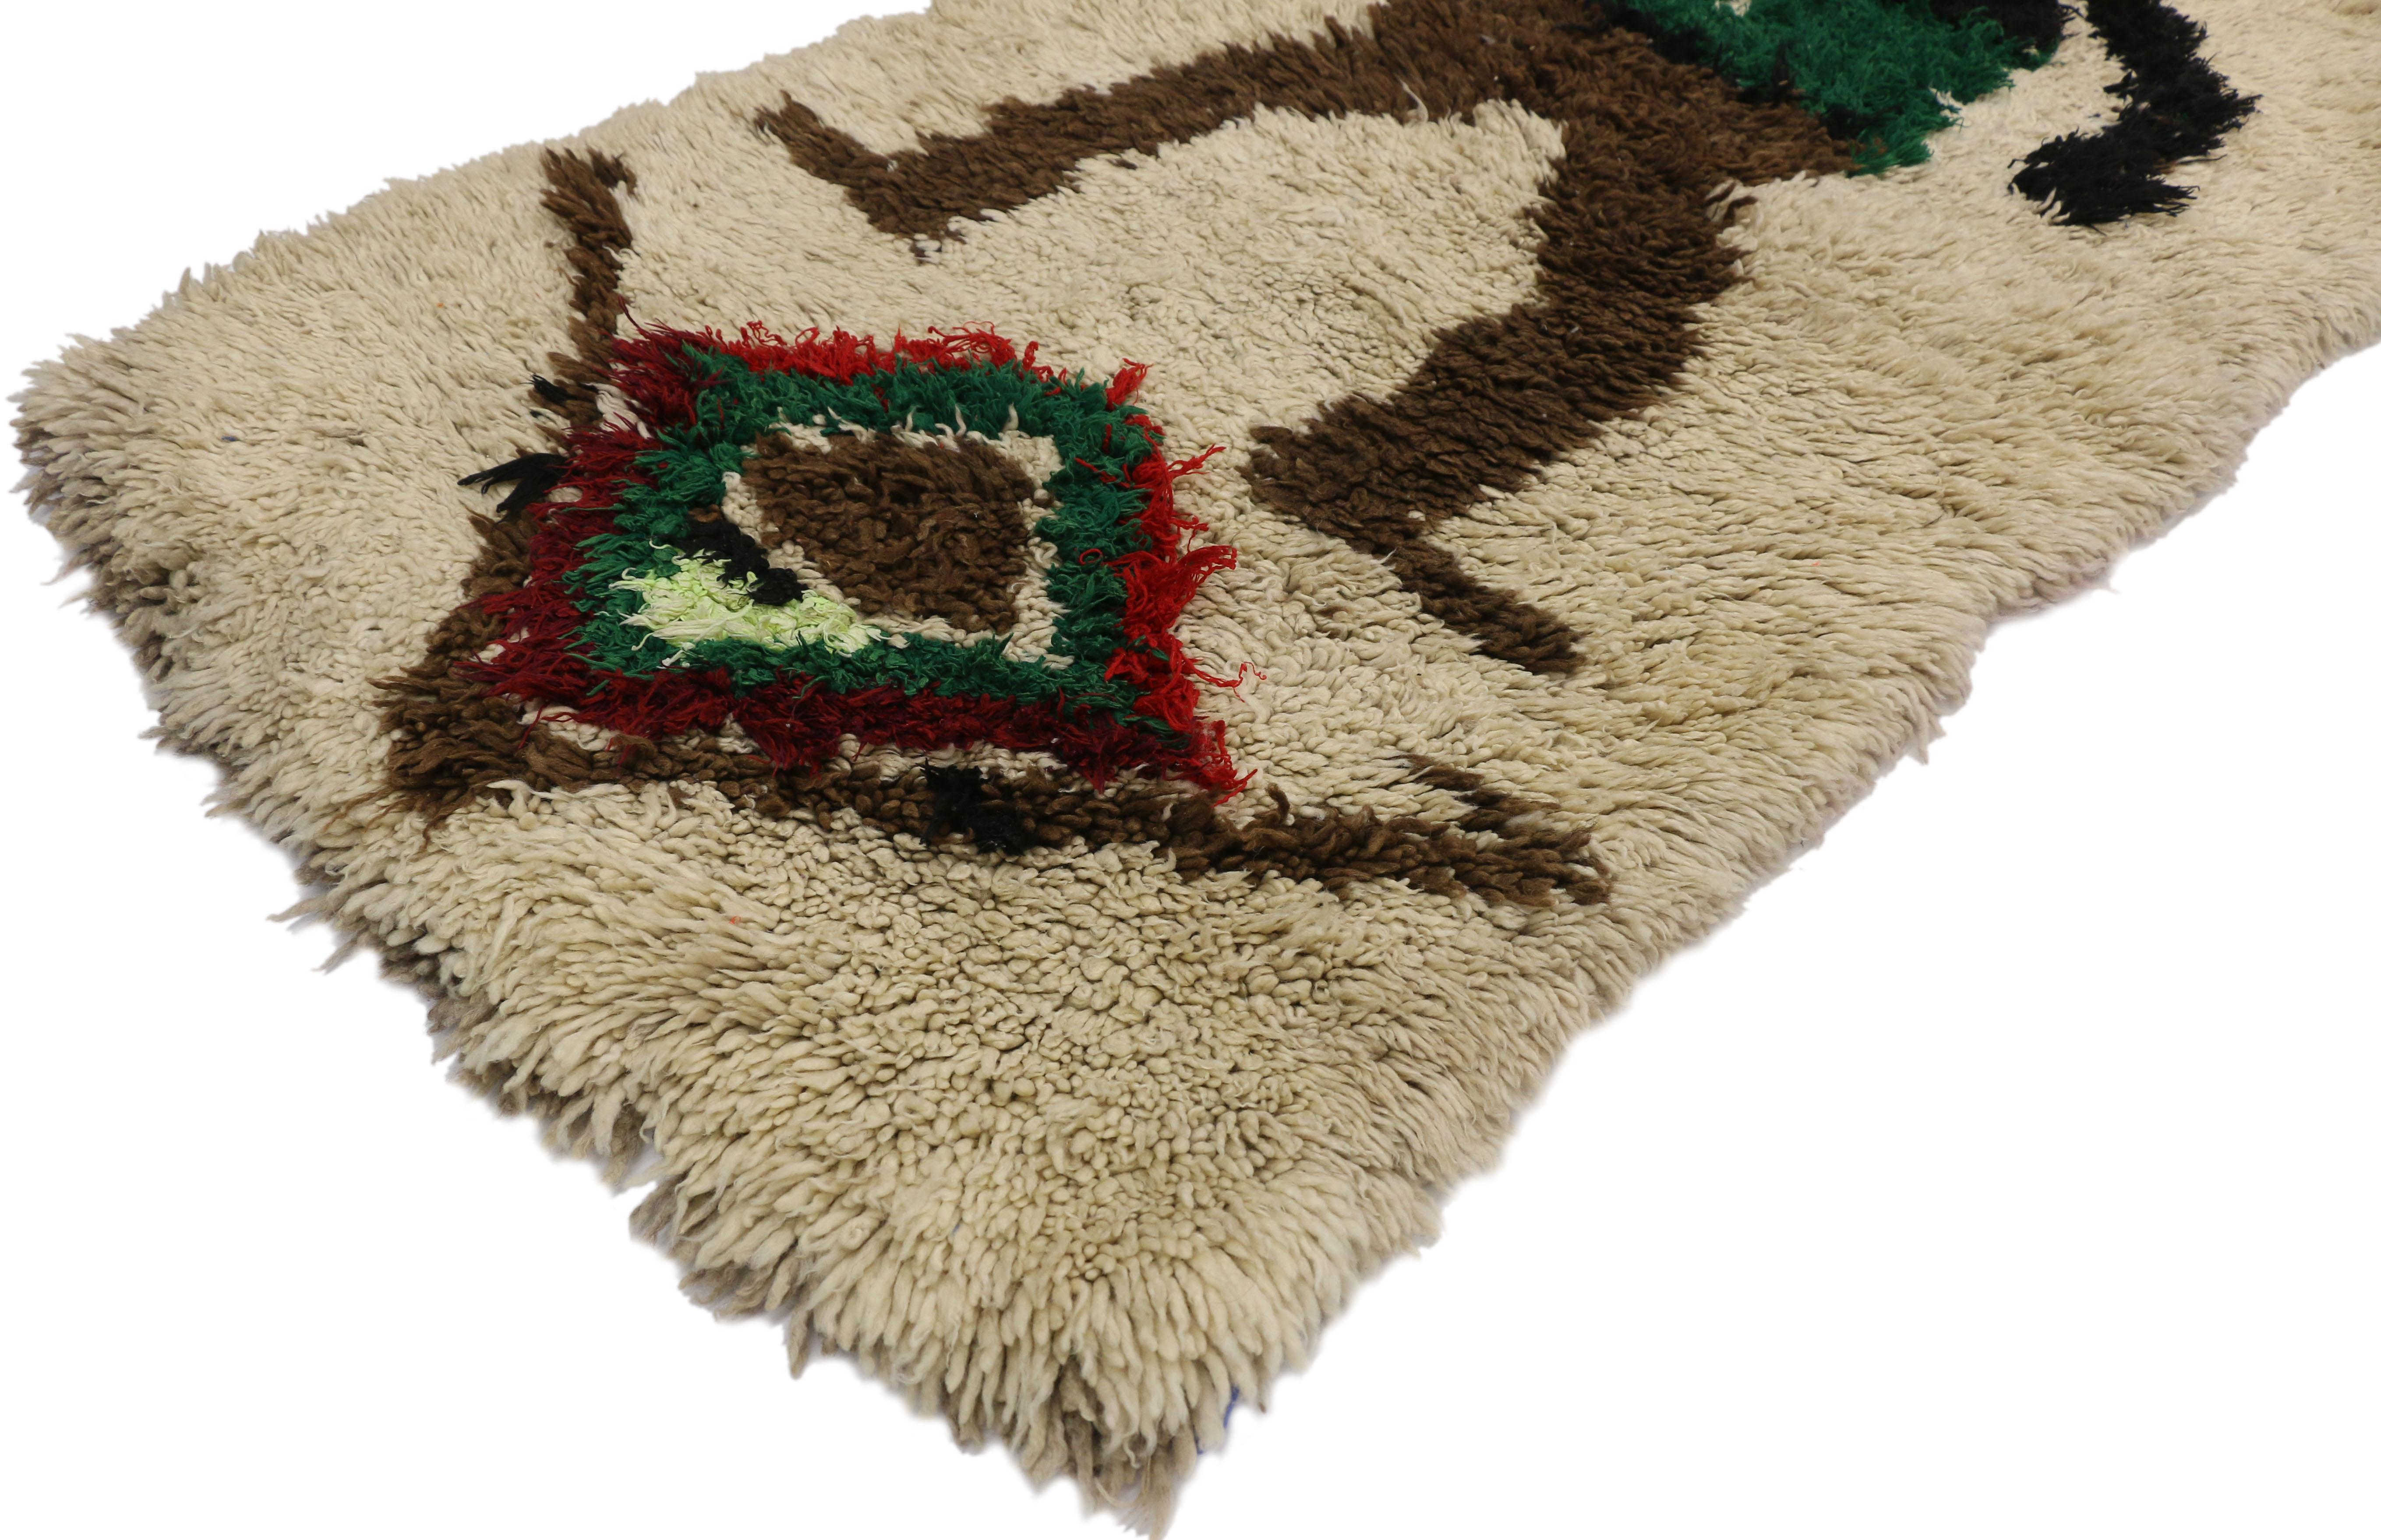 20864 vintage Berber Boucherouite Moroccan Azilal rug with Folk Art expressionist Tribal style. This hand knotted wool and cotton vintage Berber Boucherouite Moroccan rug with tribal style features a female figure with an ambiguous lozenge diamond